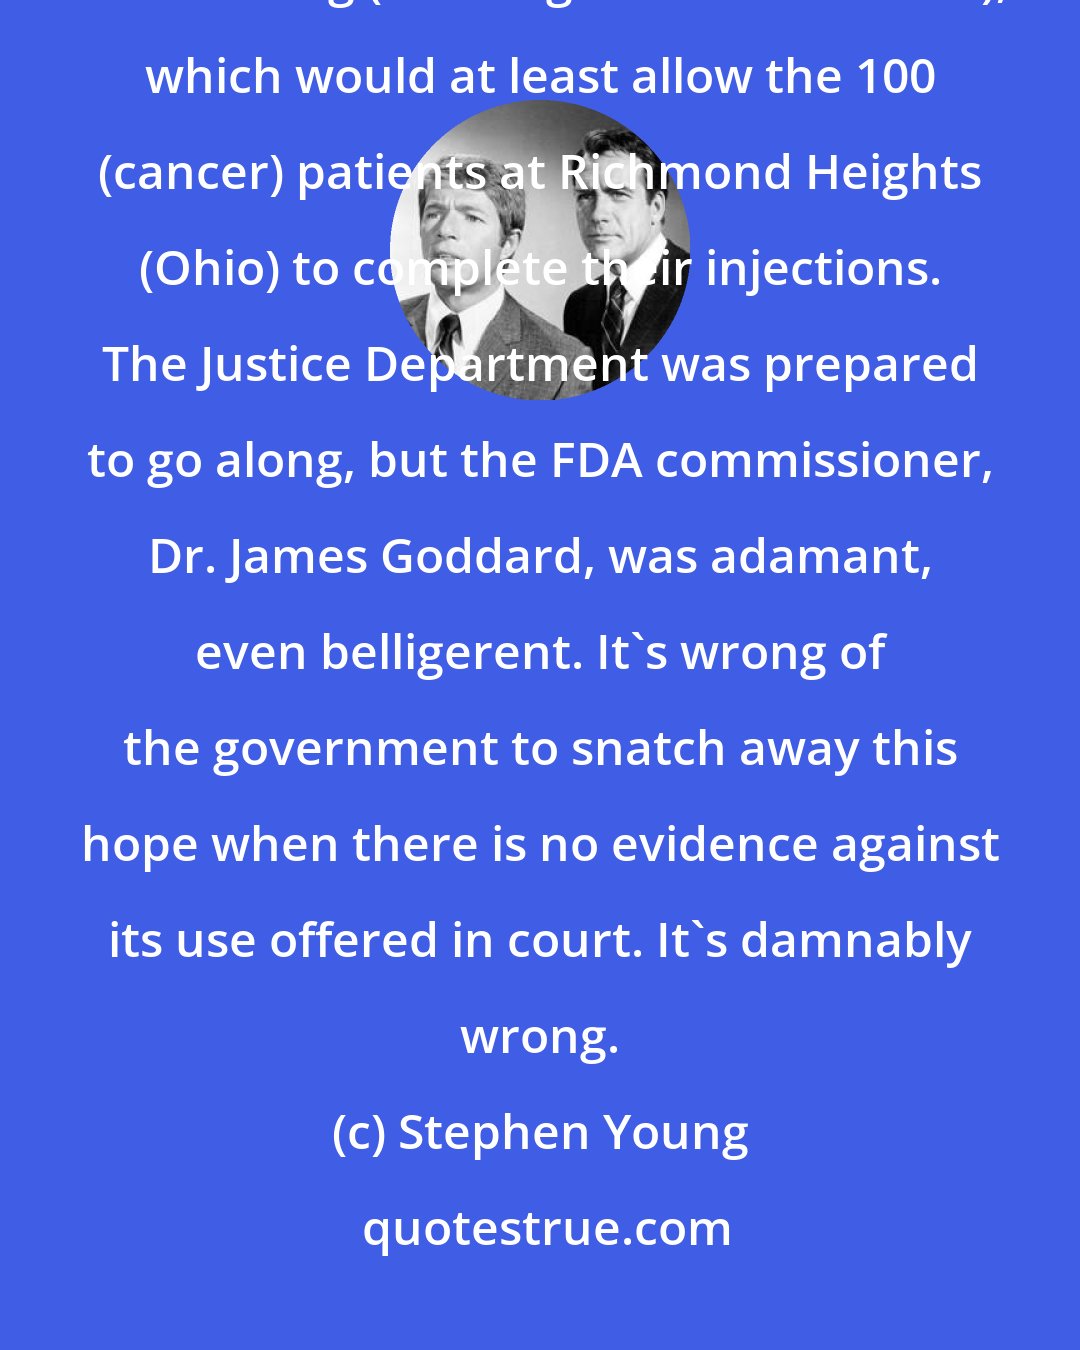 Stephen Young: I could not move them. They would not even agree to a modification, of the ruling (banning the Rand vaccine), which would at least allow the 100 (cancer) patients at Richmond Heights (Ohio) to complete their injections. The Justice Department was prepared to go along, but the FDA commissioner, Dr. James Goddard, was adamant, even belligerent. It's wrong of the government to snatch away this hope when there is no evidence against its use offered in court. It's damnably wrong.